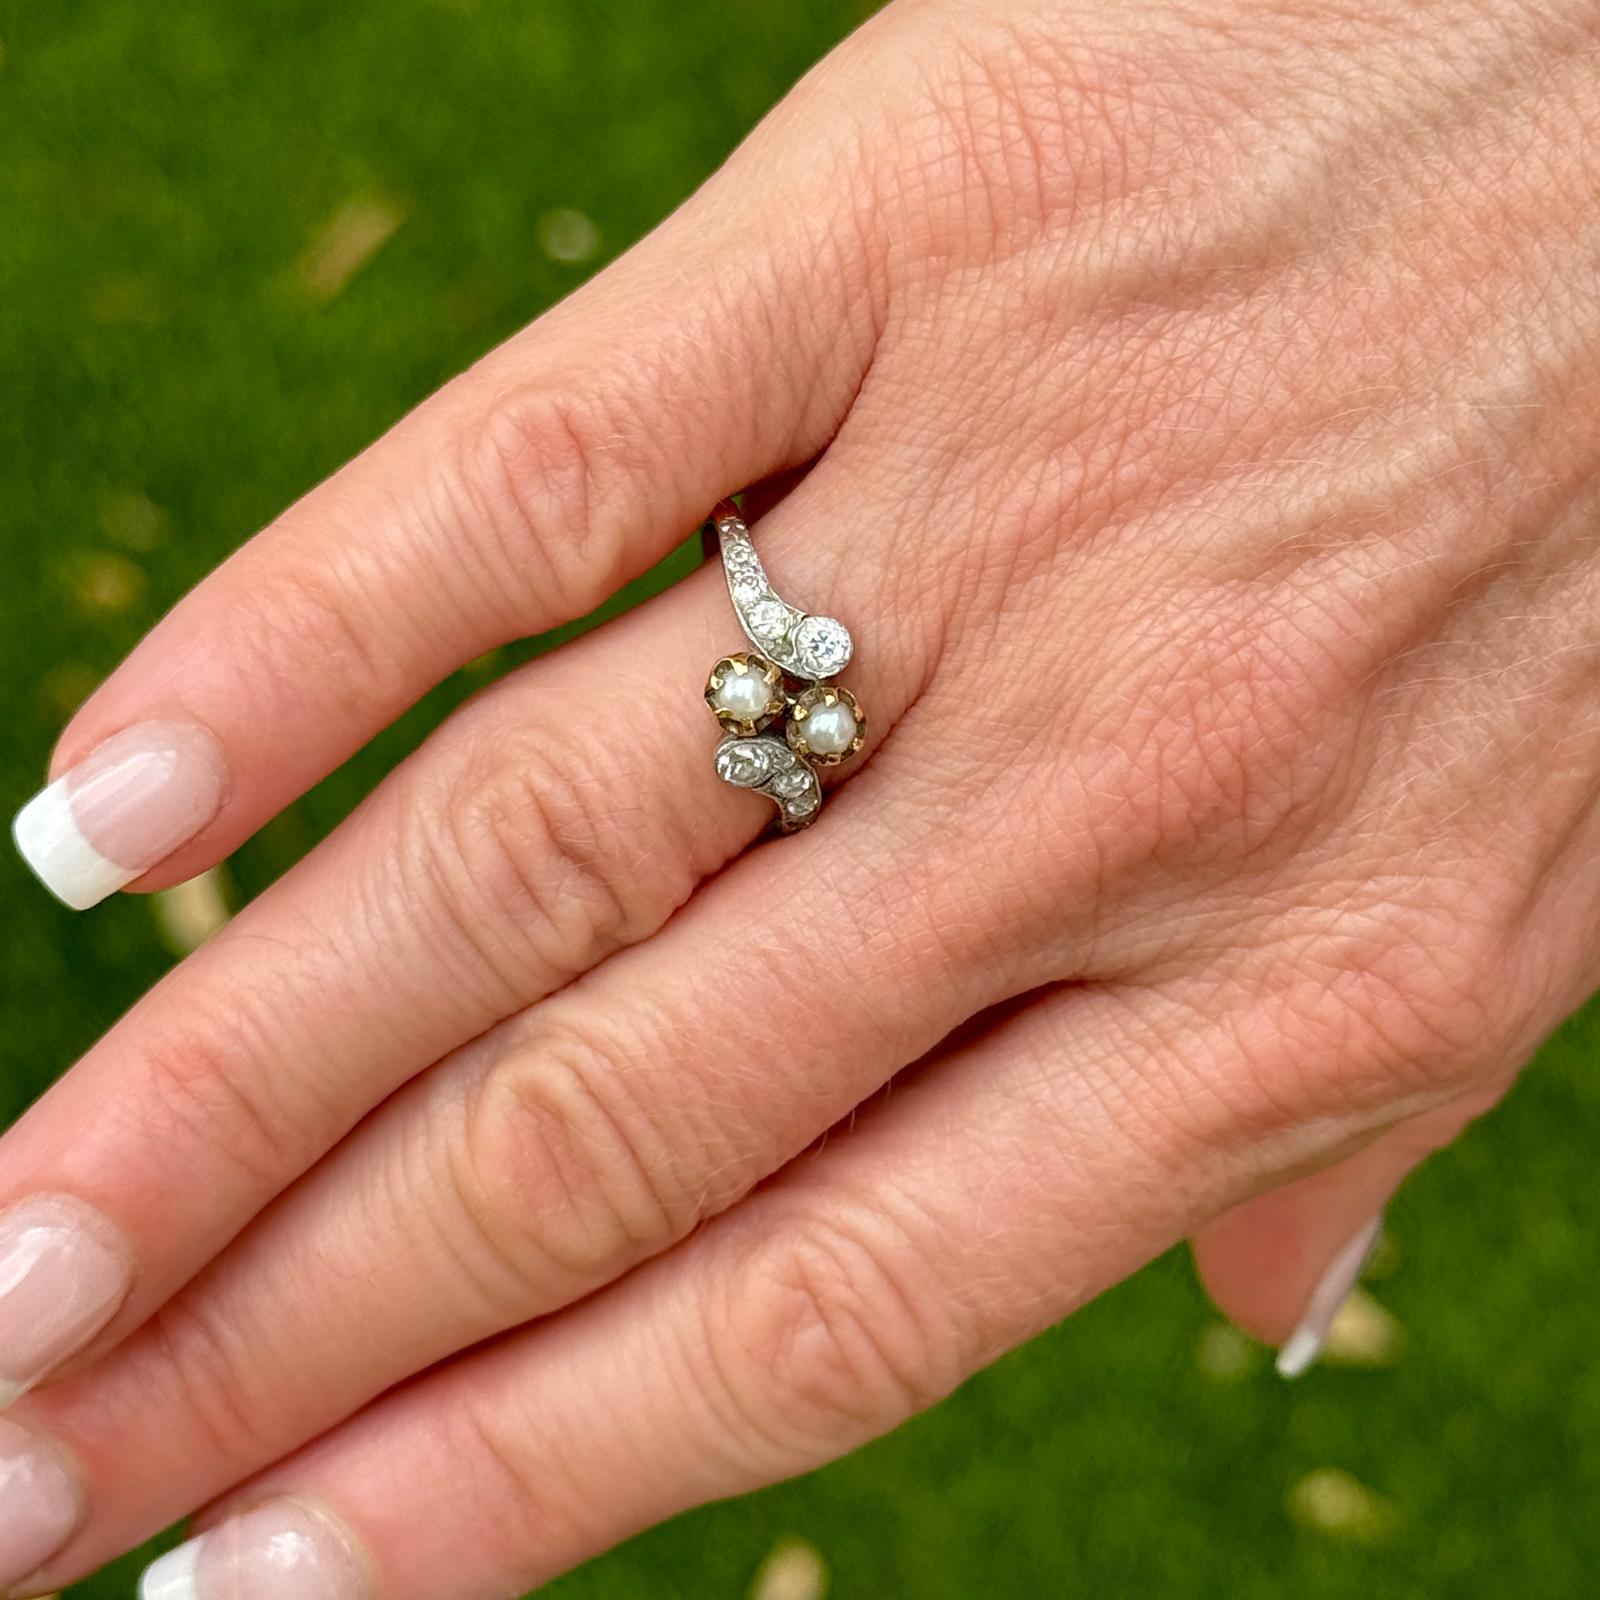 This Edwardian diamond and pearl ring is a splendid representation of the romantic and elegant jewelry of the early 20th century. The ring features a delicate and intricate design that showcases the opulence and sophistication of the Edwardian era